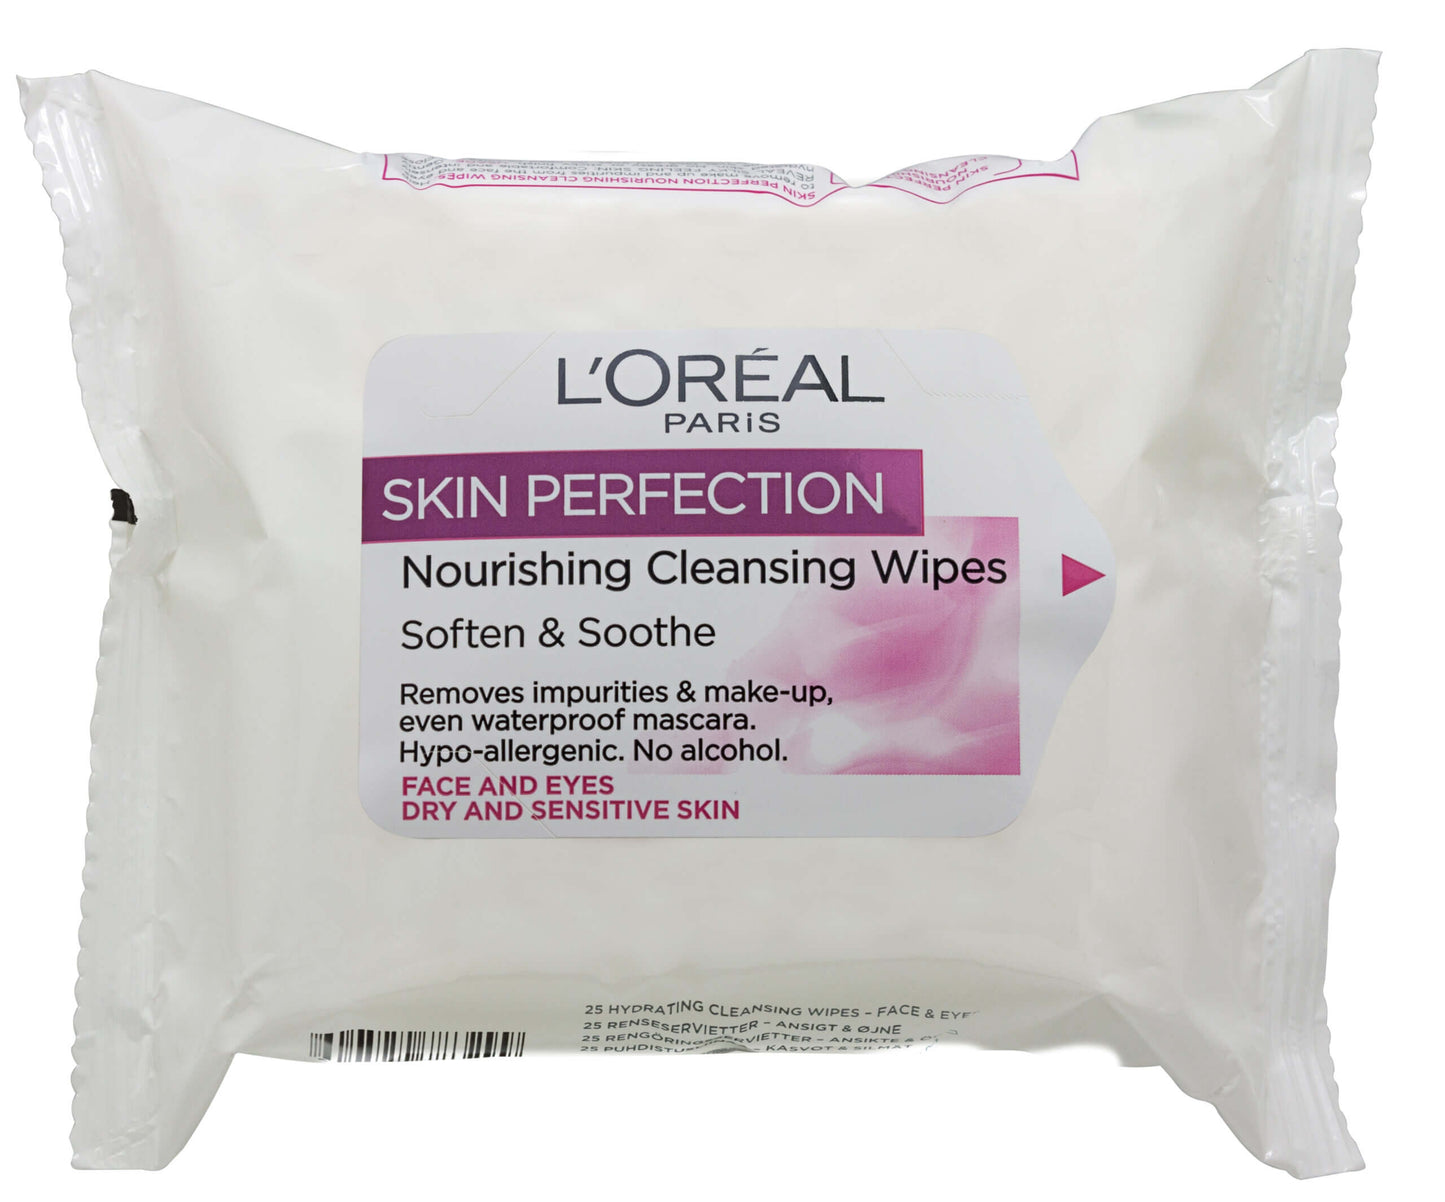 Skin Perfection By L'Oreal Paris Nourishing Cleansing Wipes